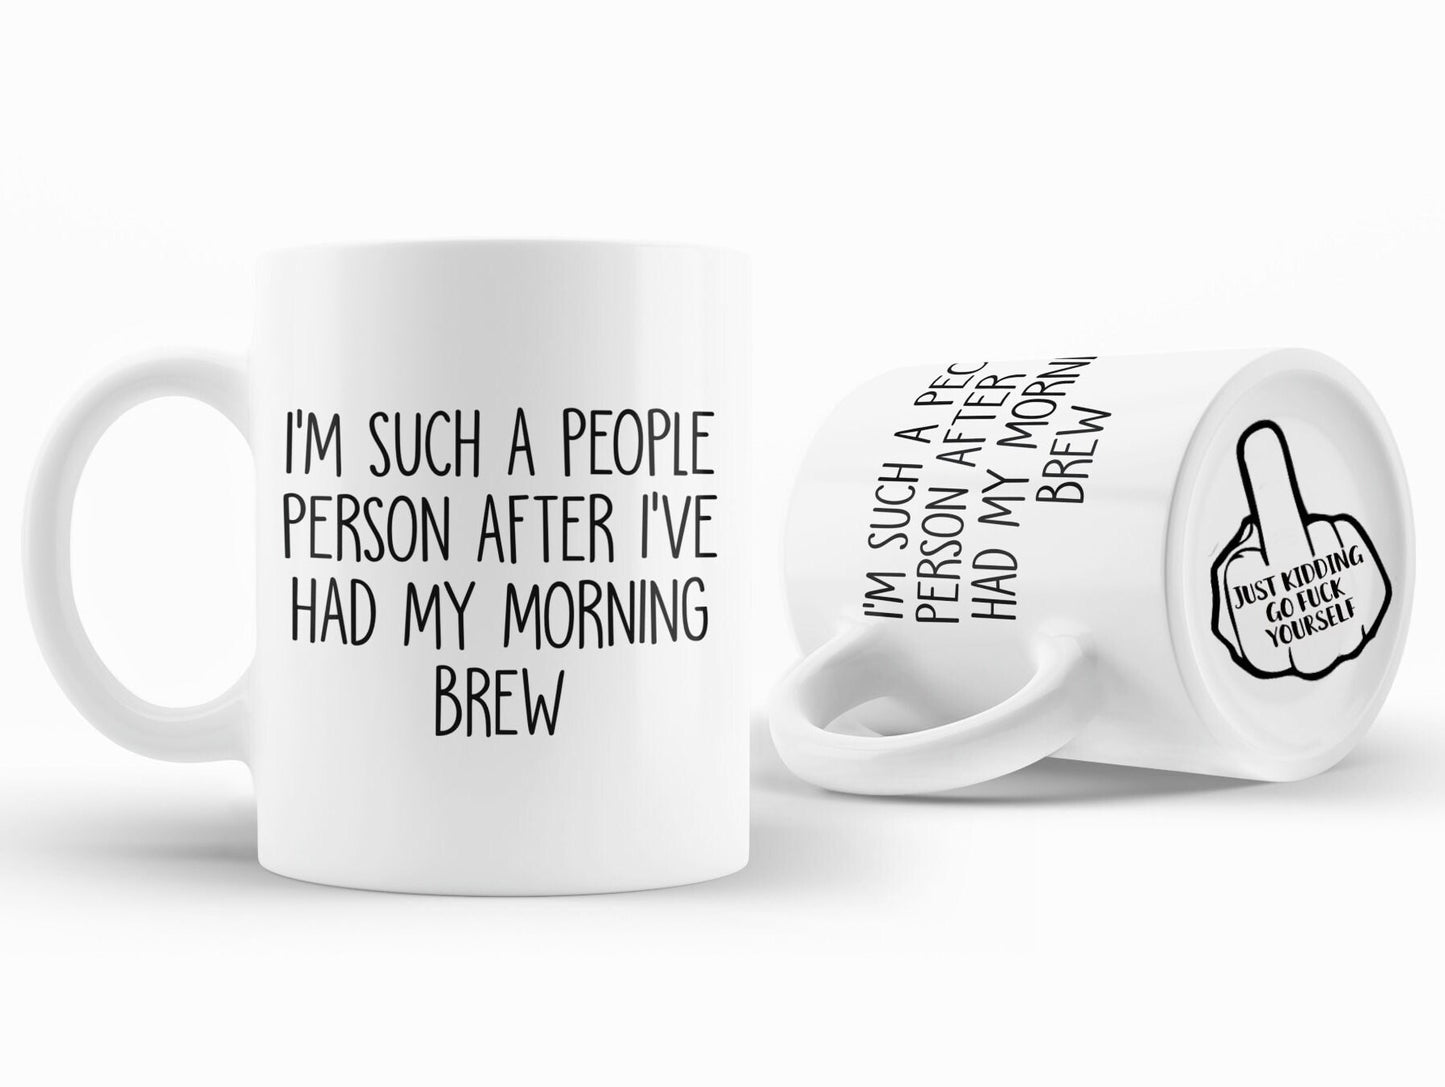 Mug- I'm Such A People Person After My Morning Brew (Just kidding go fuck yourself)